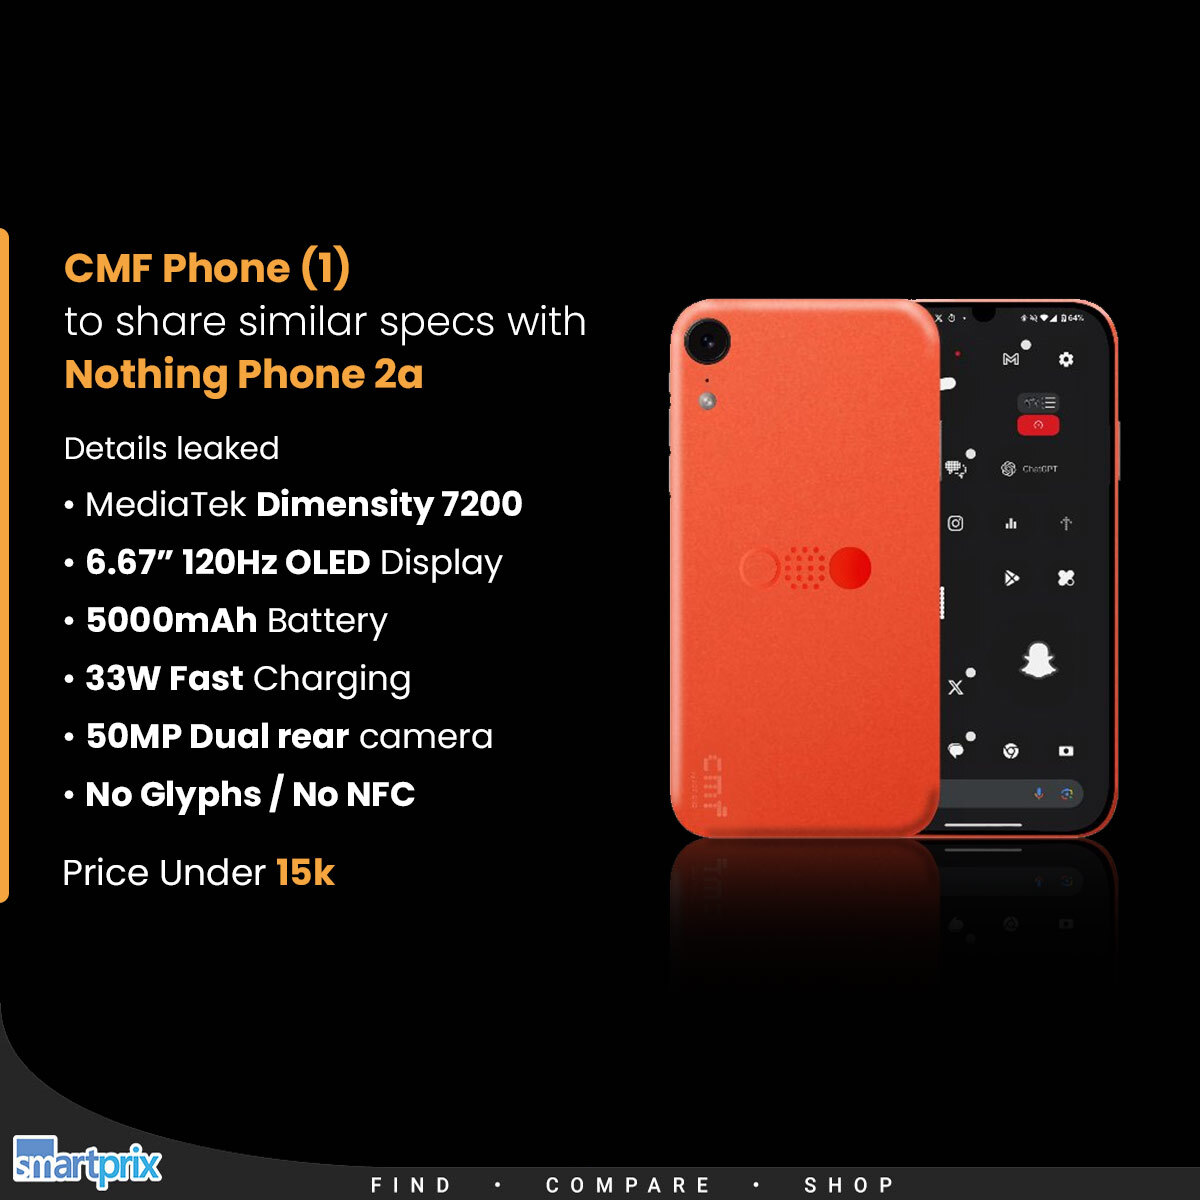 CMF Phone (1): Same specs, different design? Leaks reveal specs similar to Nothing Phone 2a. smpx.to/3hUdtA #Nothing #NothingPhone2a #CMFPhone1 #CMFbyNothing